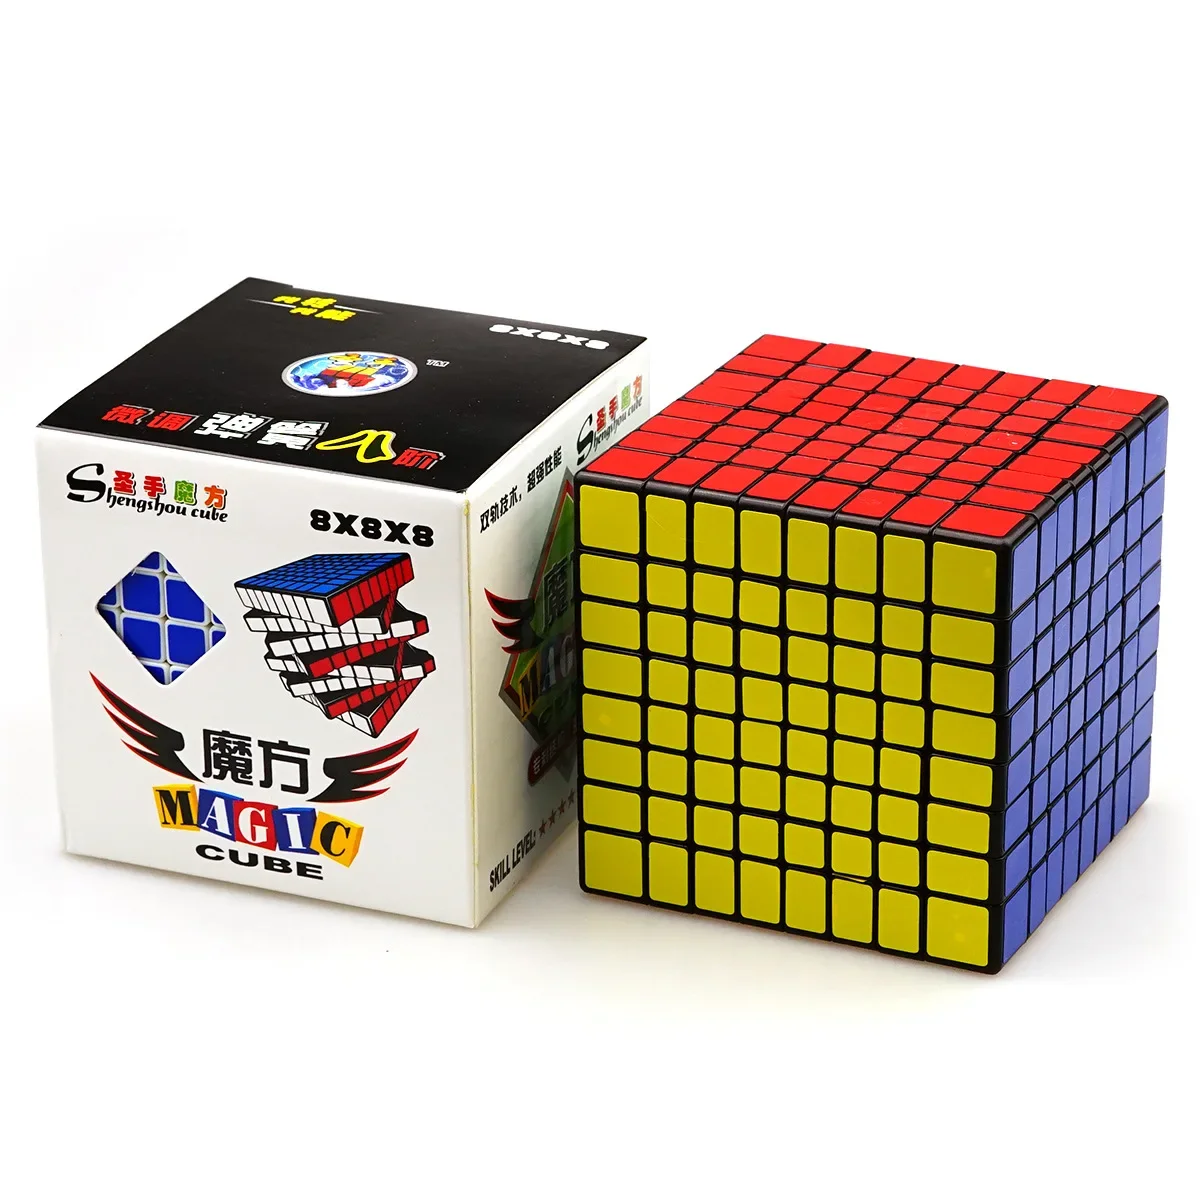 

[ECube] SengSo 8x8x8 black square high-order 8x8x8 difficult boy puzzle toy competition cube